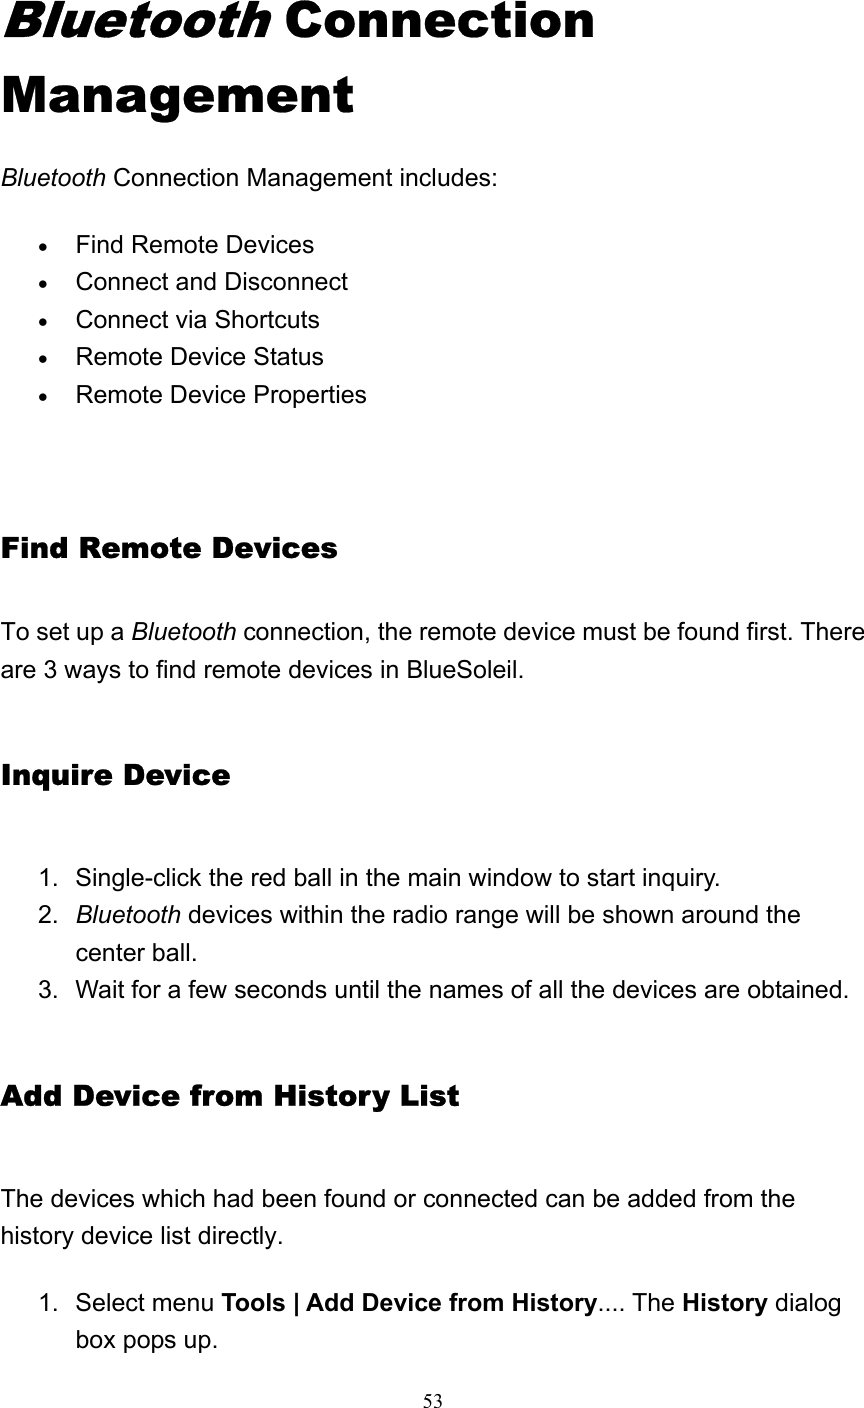   53 Bluetooth Connection Management Bluetooth Connection Management includes: • Find Remote Devices   • Connect and Disconnect   • Connect via Shortcuts   • Remote Device Status   • Remote Device Properties    Find Remote Devices To set up a Bluetooth connection, the remote device must be found first. There are 3 ways to find remote devices in BlueSoleil. Inquire Device 1.  Single-click the red ball in the main window to start inquiry.    2.  Bluetooth devices within the radio range will be shown around the center ball.    3.  Wait for a few seconds until the names of all the devices are obtained.   Add Device from History List The devices which had been found or connected can be added from the history device list directly. 1. Select menu Tools | Add Device from History.... The History dialog box pops up.    